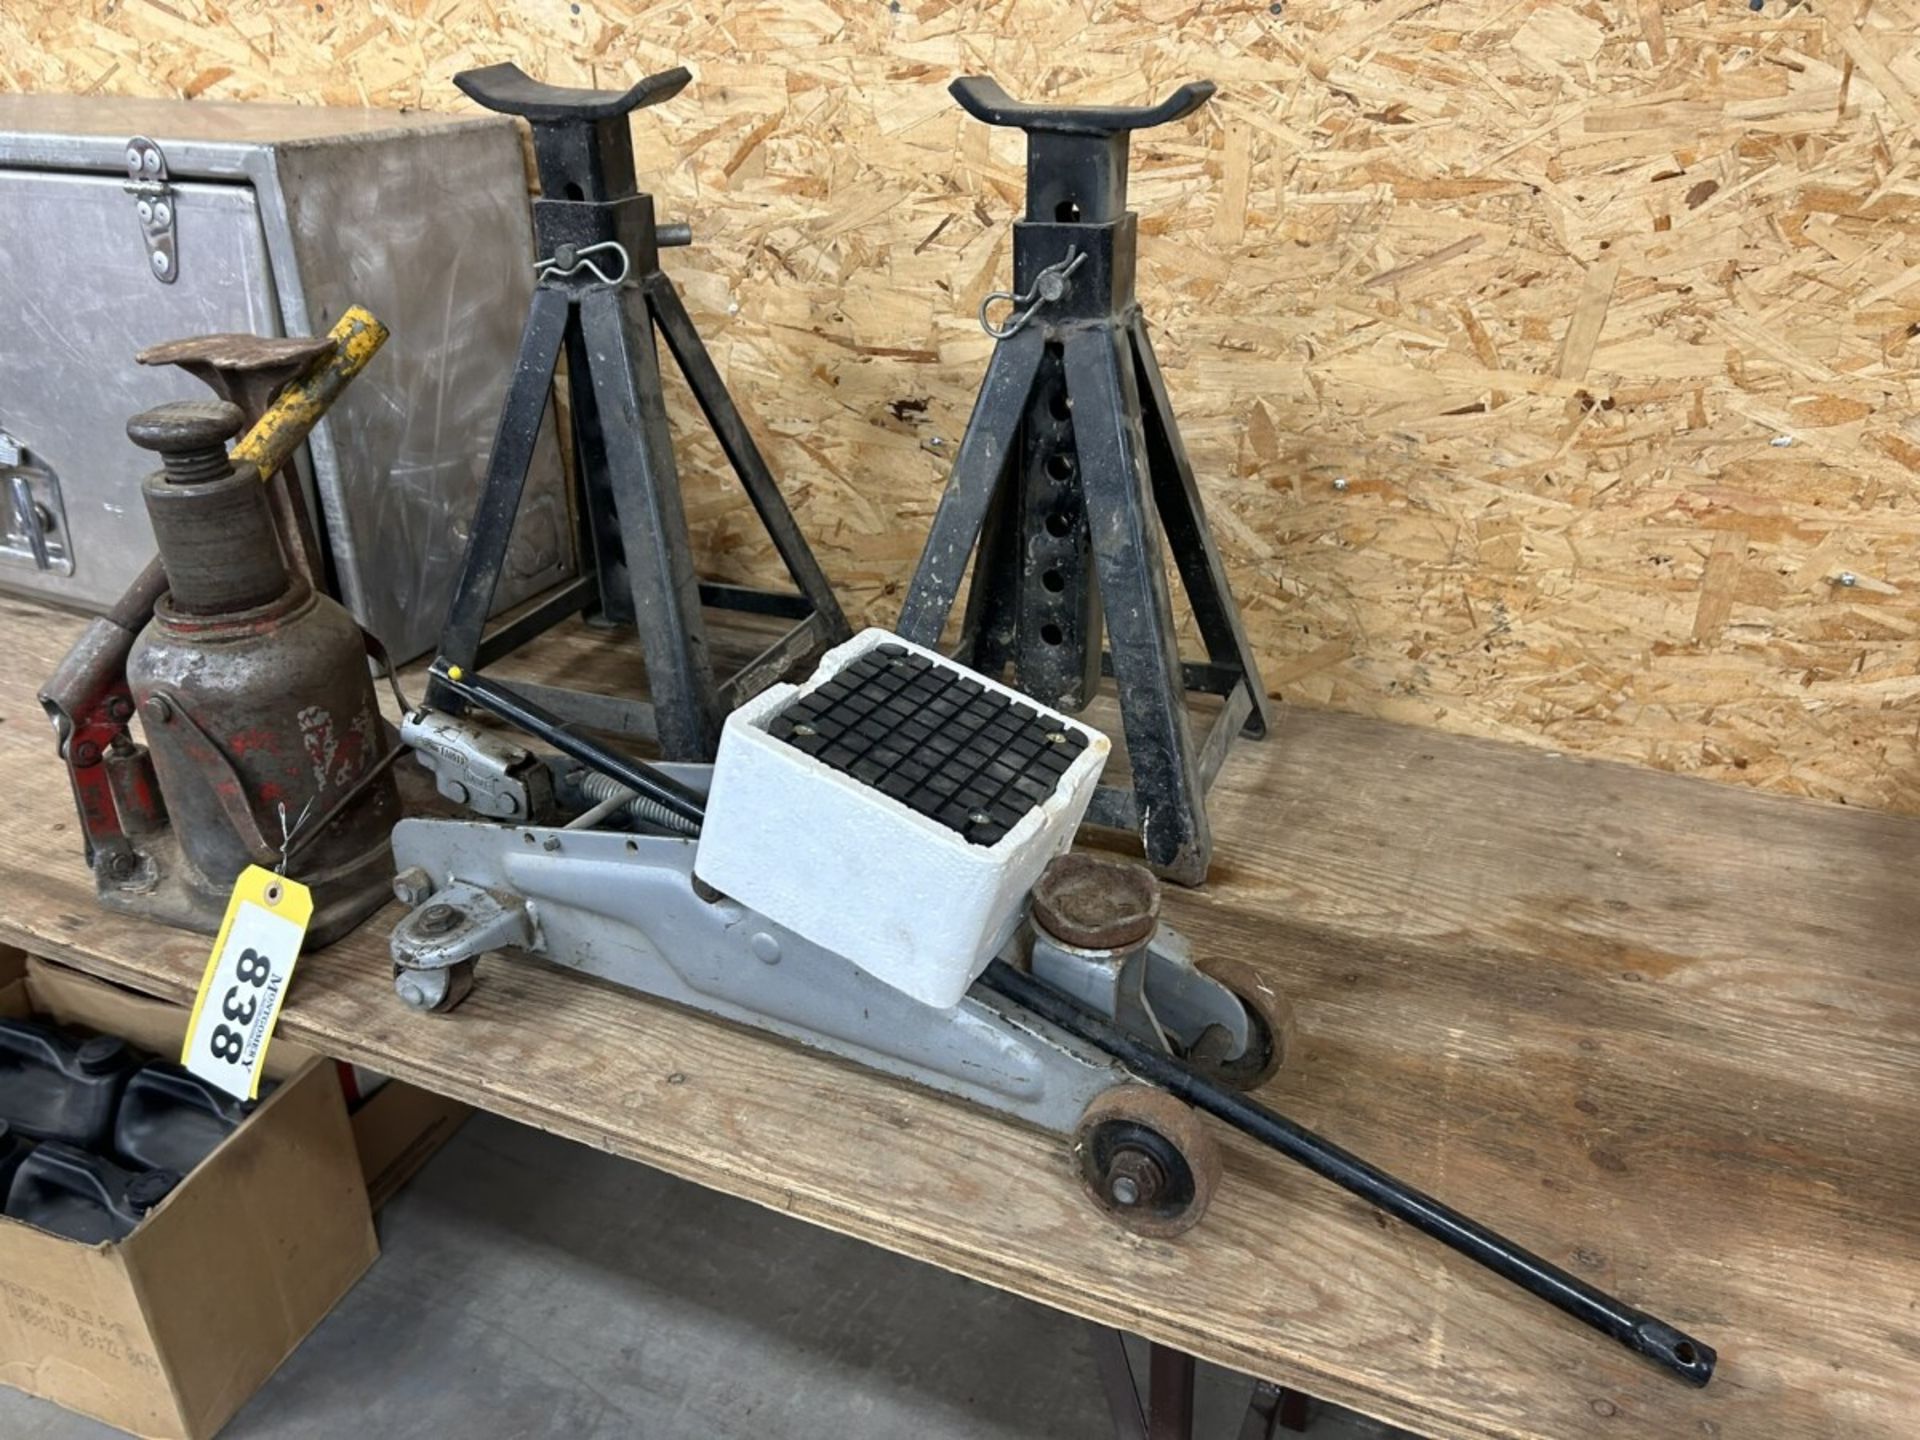 PAIR OF HEAVY DUTY JACK STANDS W/ BOTTLE JACK AND SERVICE JACK